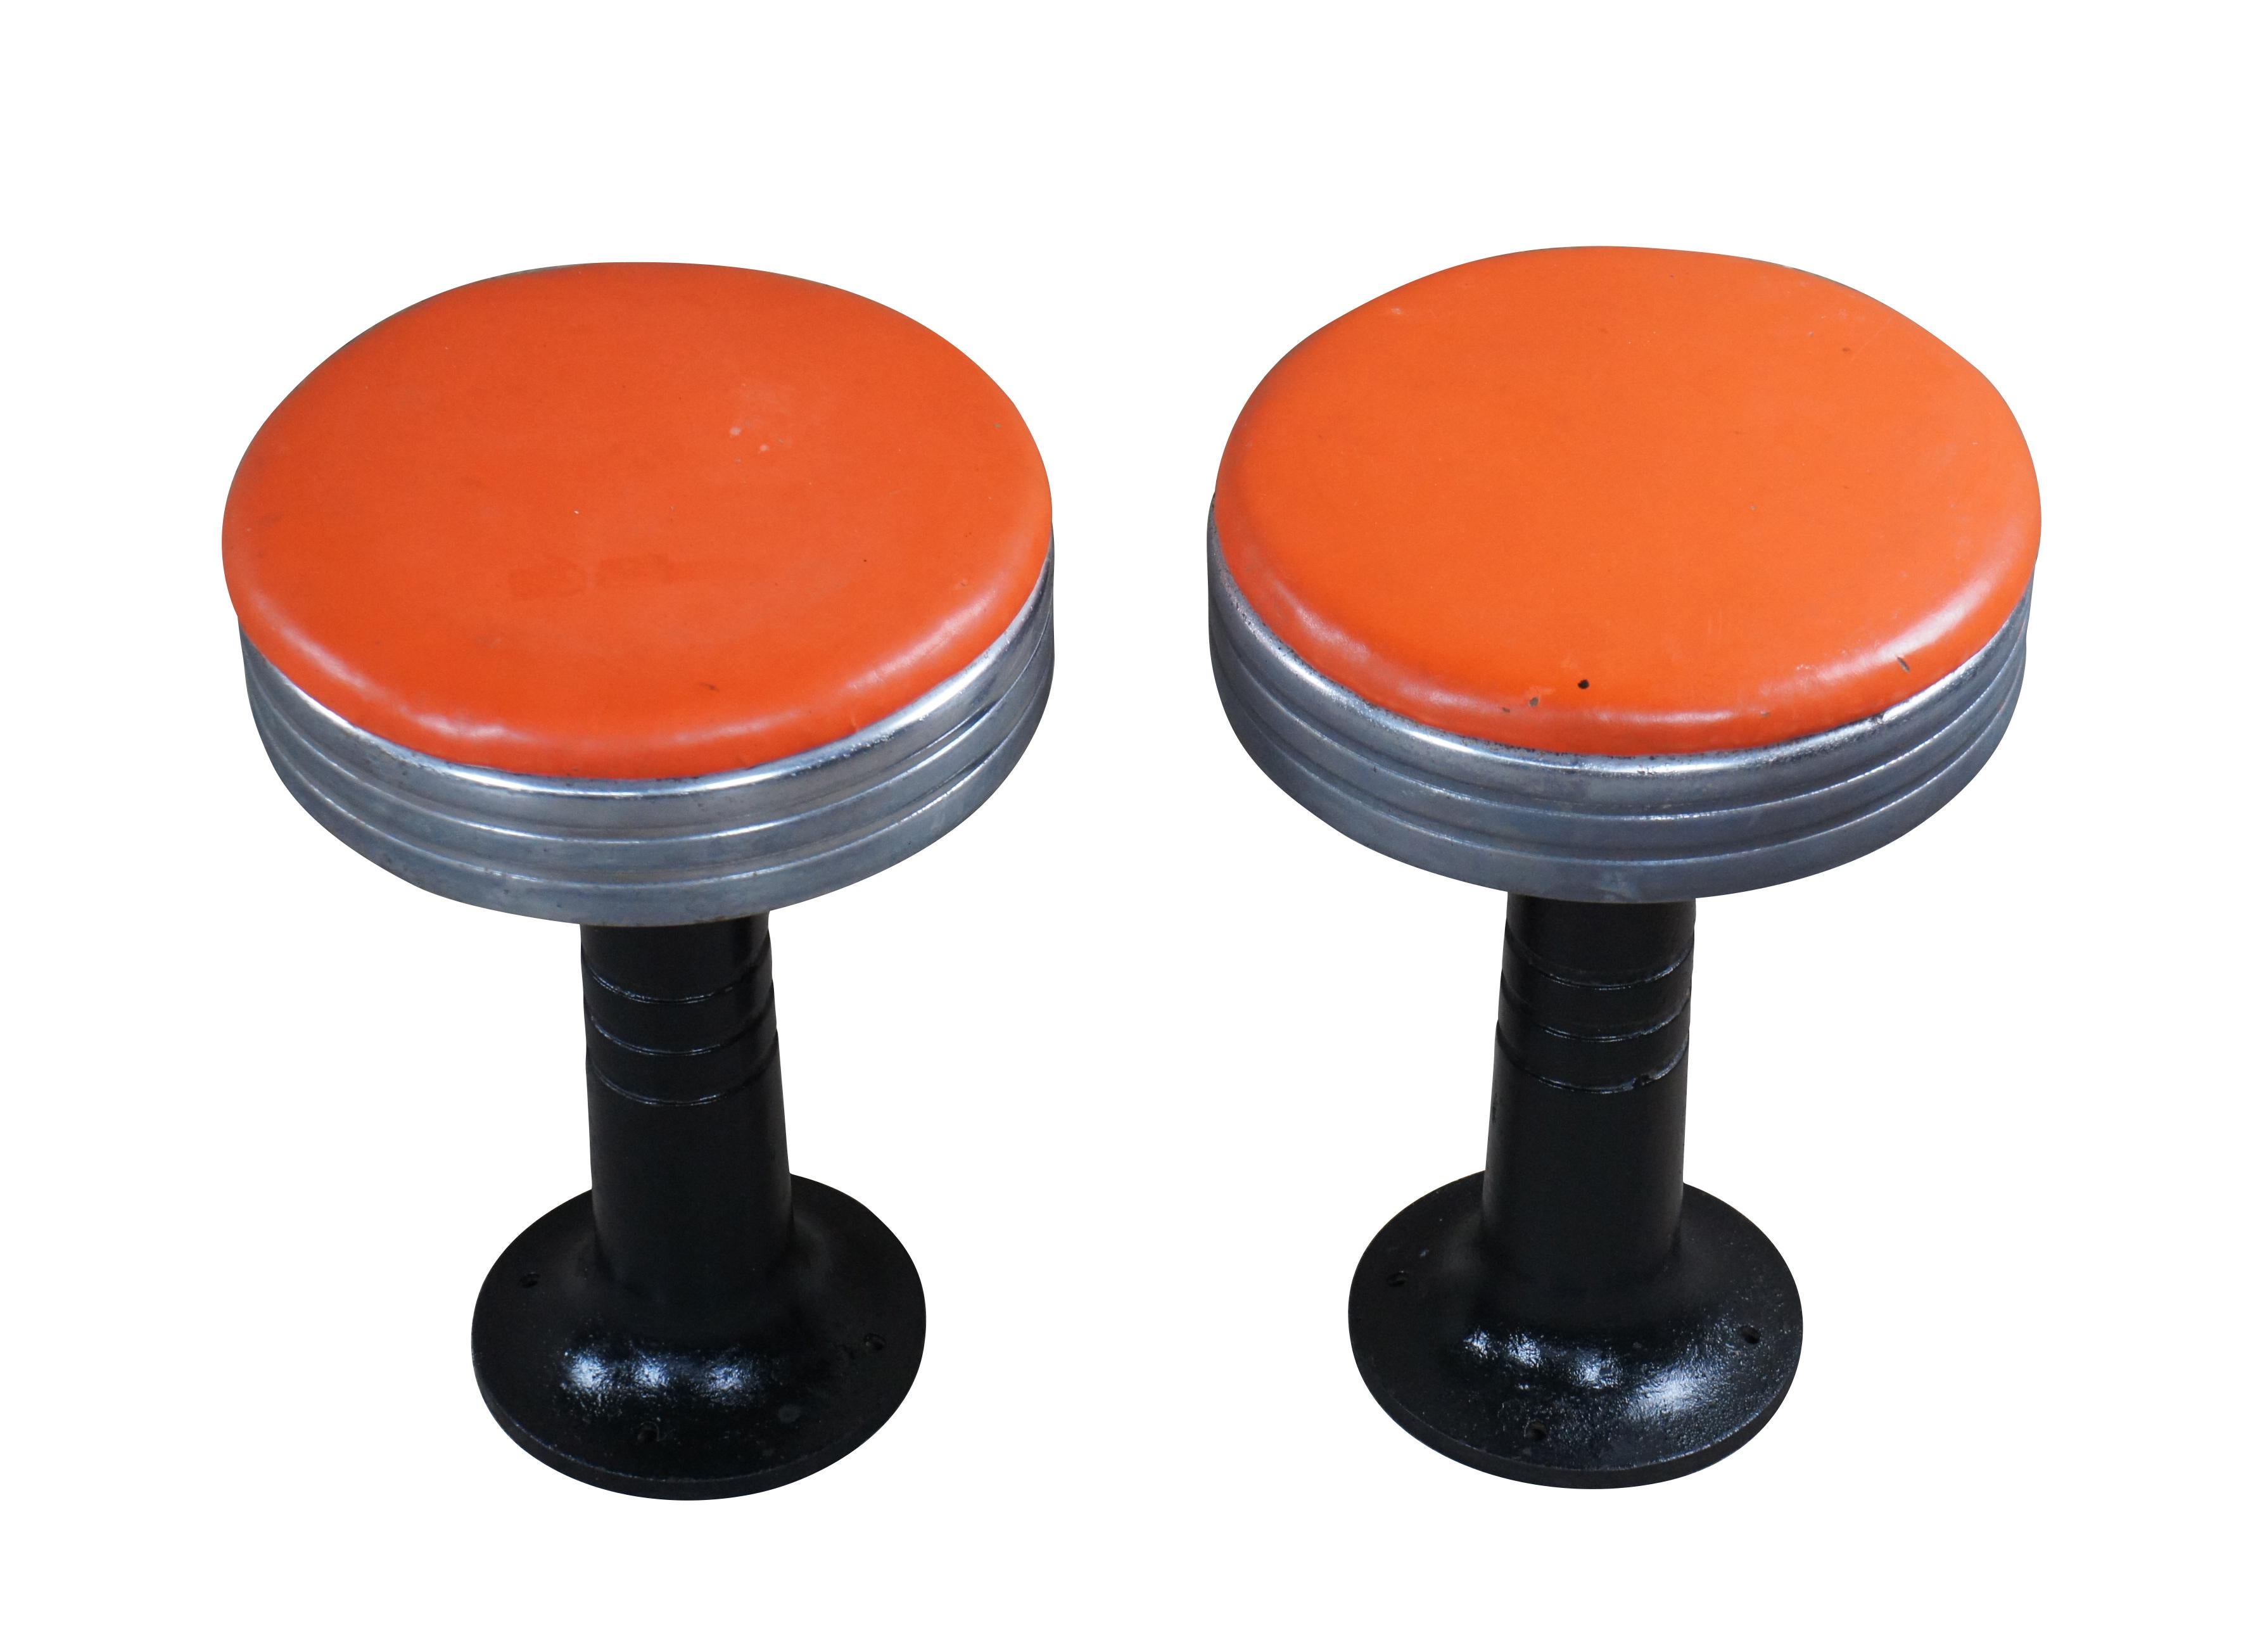 Pair of Late Art Deco Retro Soda / Fountain stools.  Made from chrome with a cast iron base and orange seat.  Each stool swivels.

Dimensions:
13